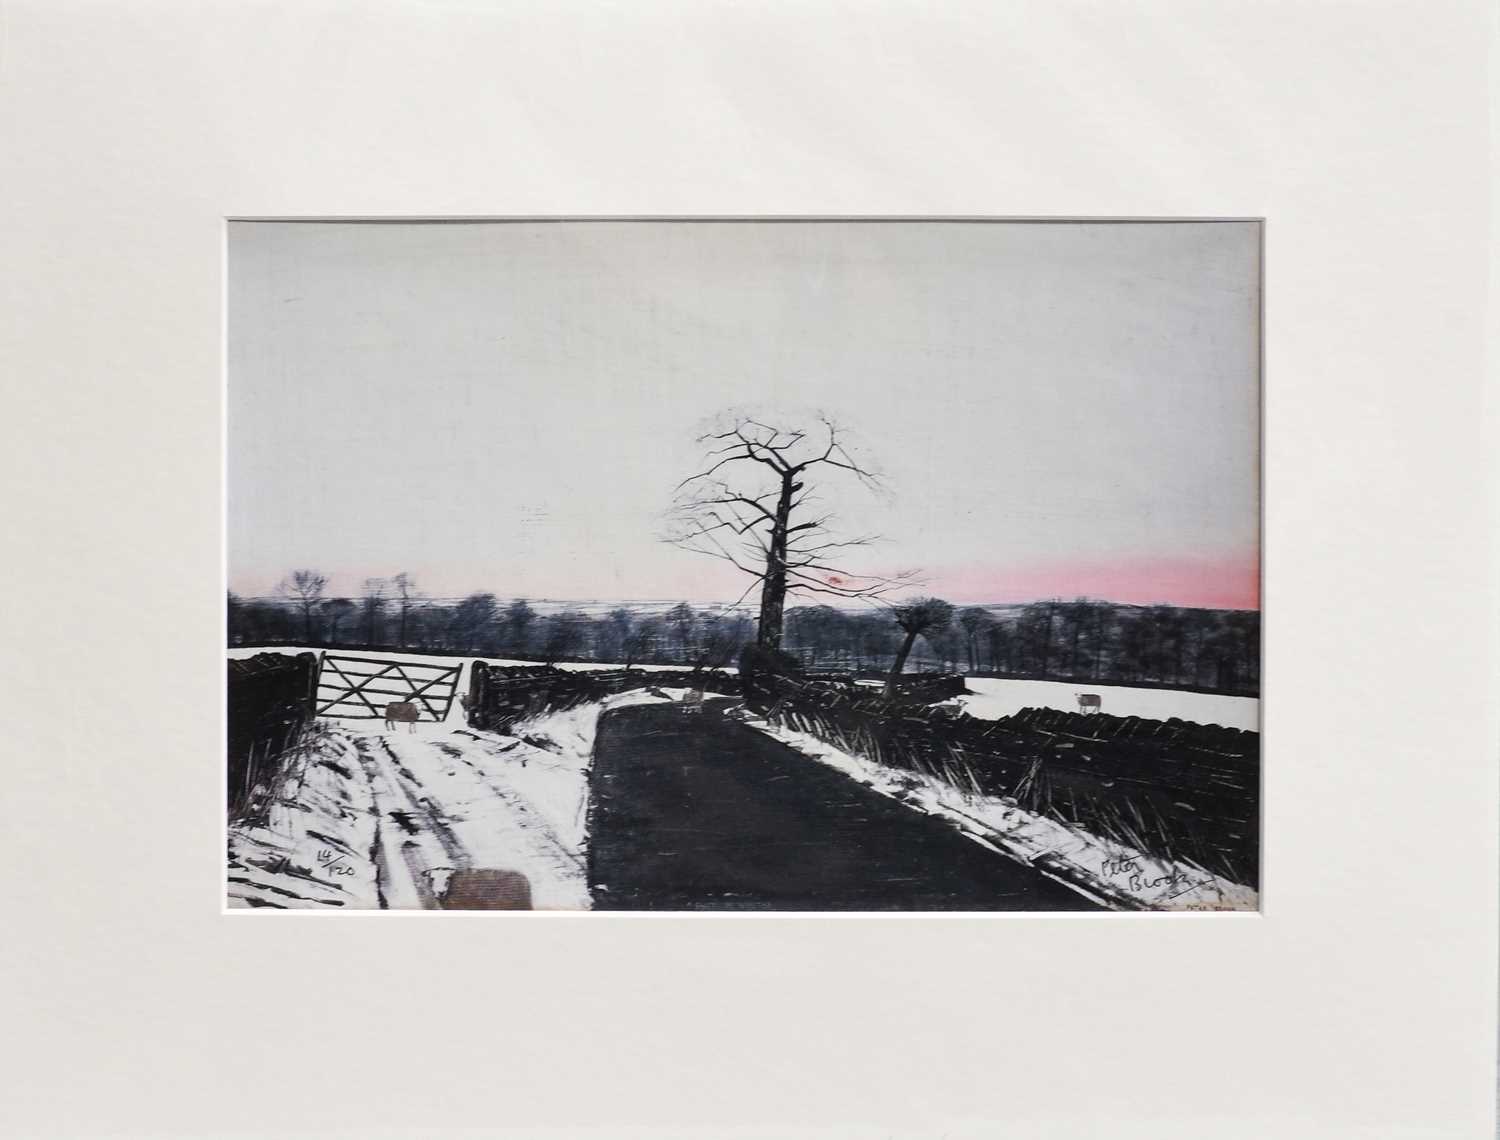 Peter Brook RBA (1927-2009)"Sheep in Winter"Signed limited edition print, numbered 14/120, 18cm by - Image 2 of 2